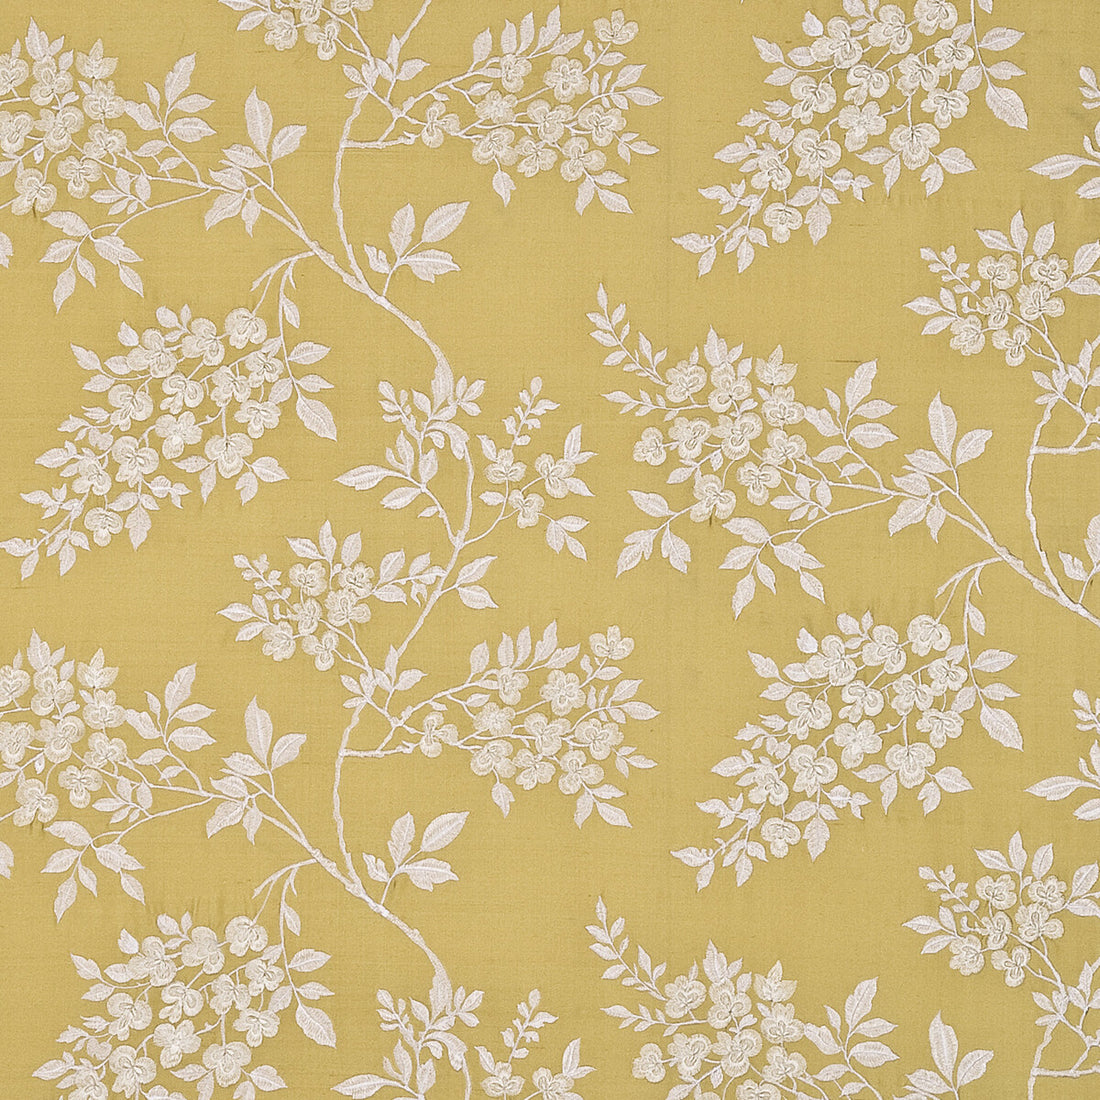 Wisteria Silk fabric in mimosa color - pattern BF10399.1.0 - by G P &amp; J Baker in the Holcott collection